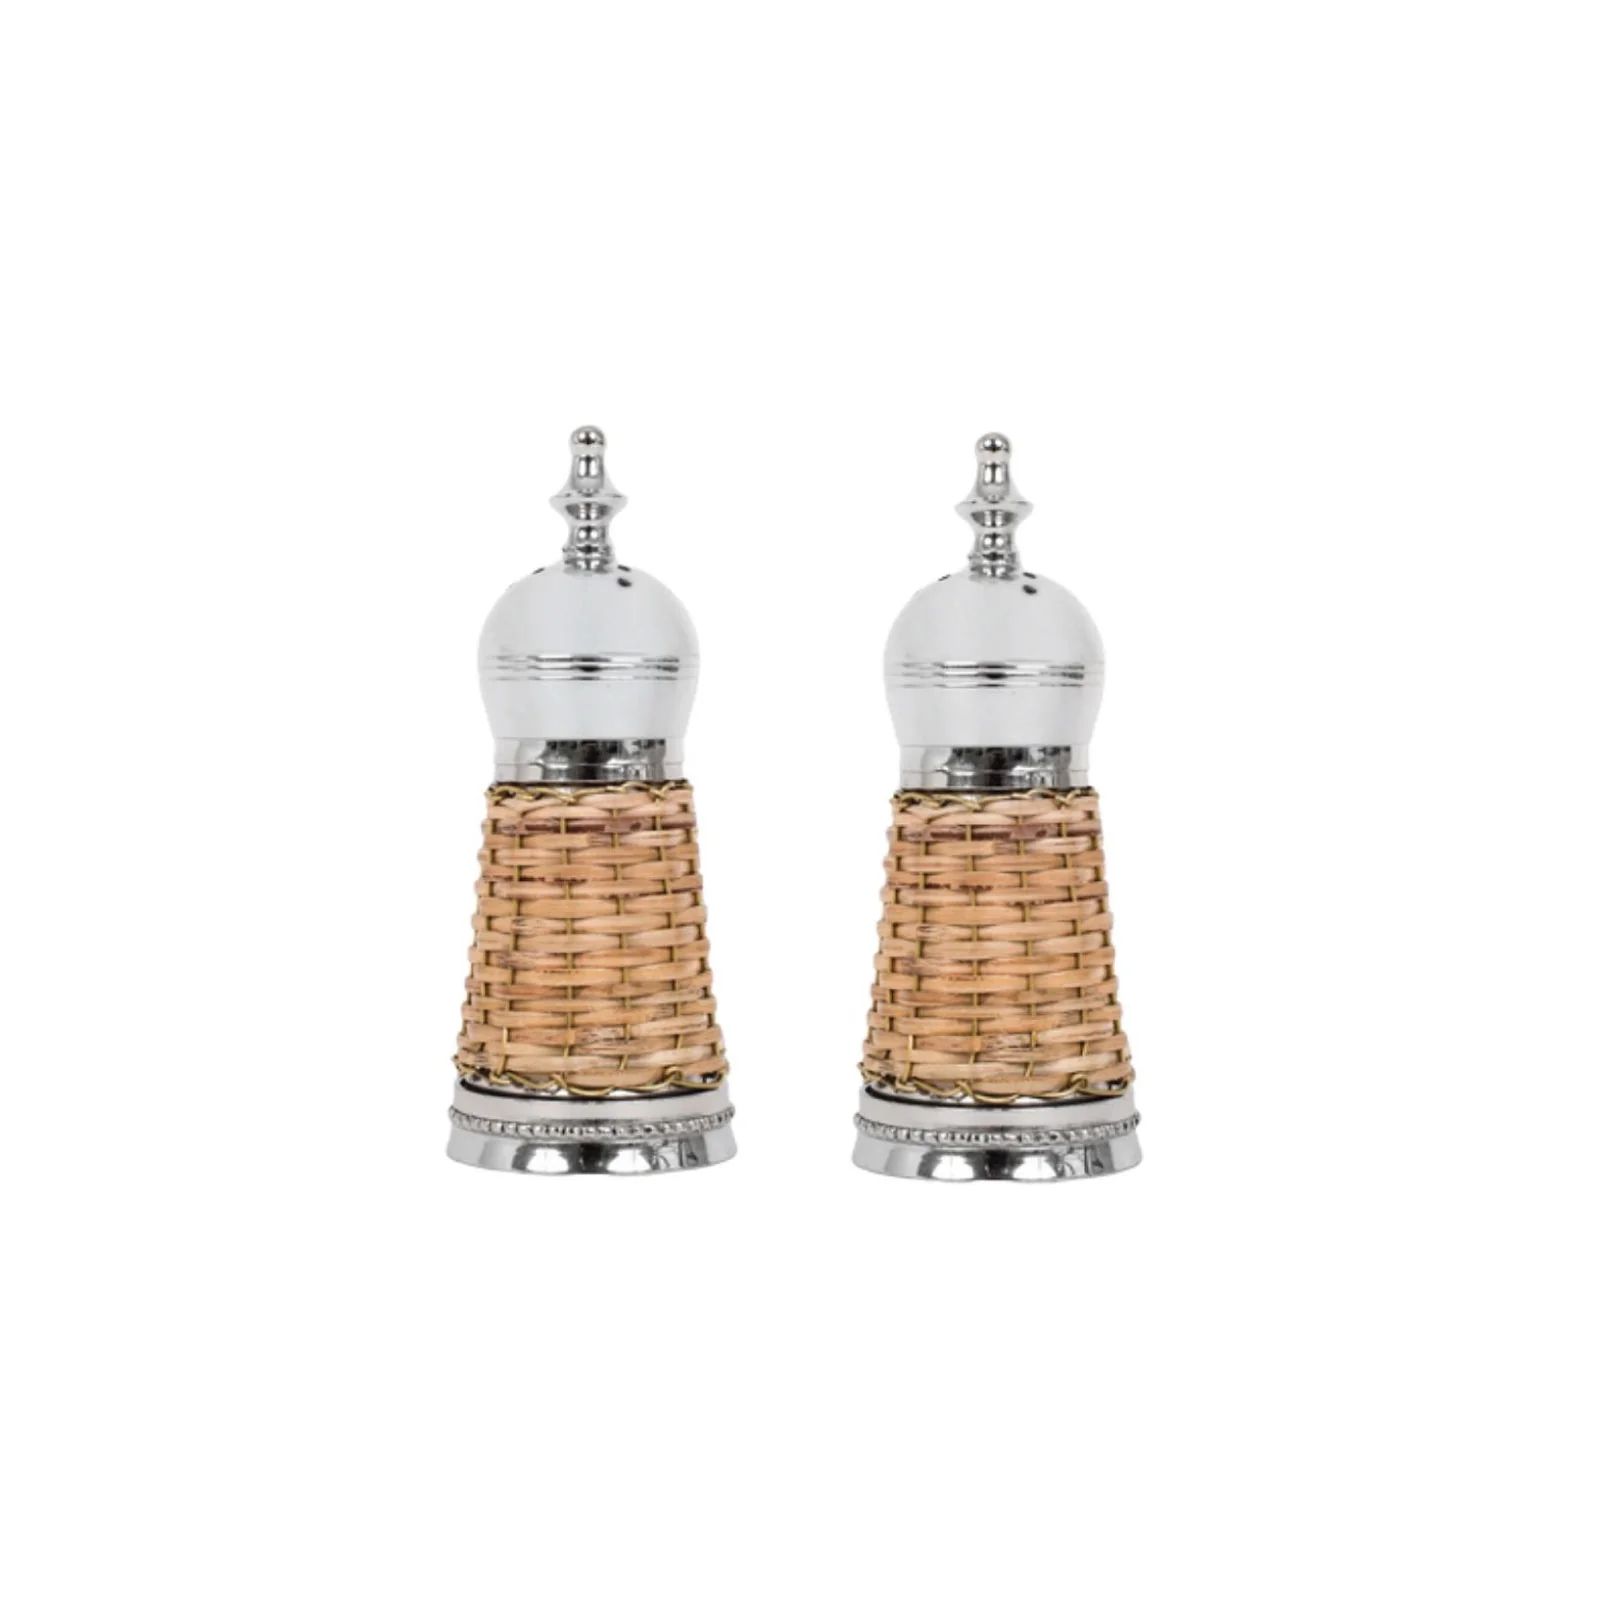 Wicker Salt and Pepper Shaker | Brooke and Lou